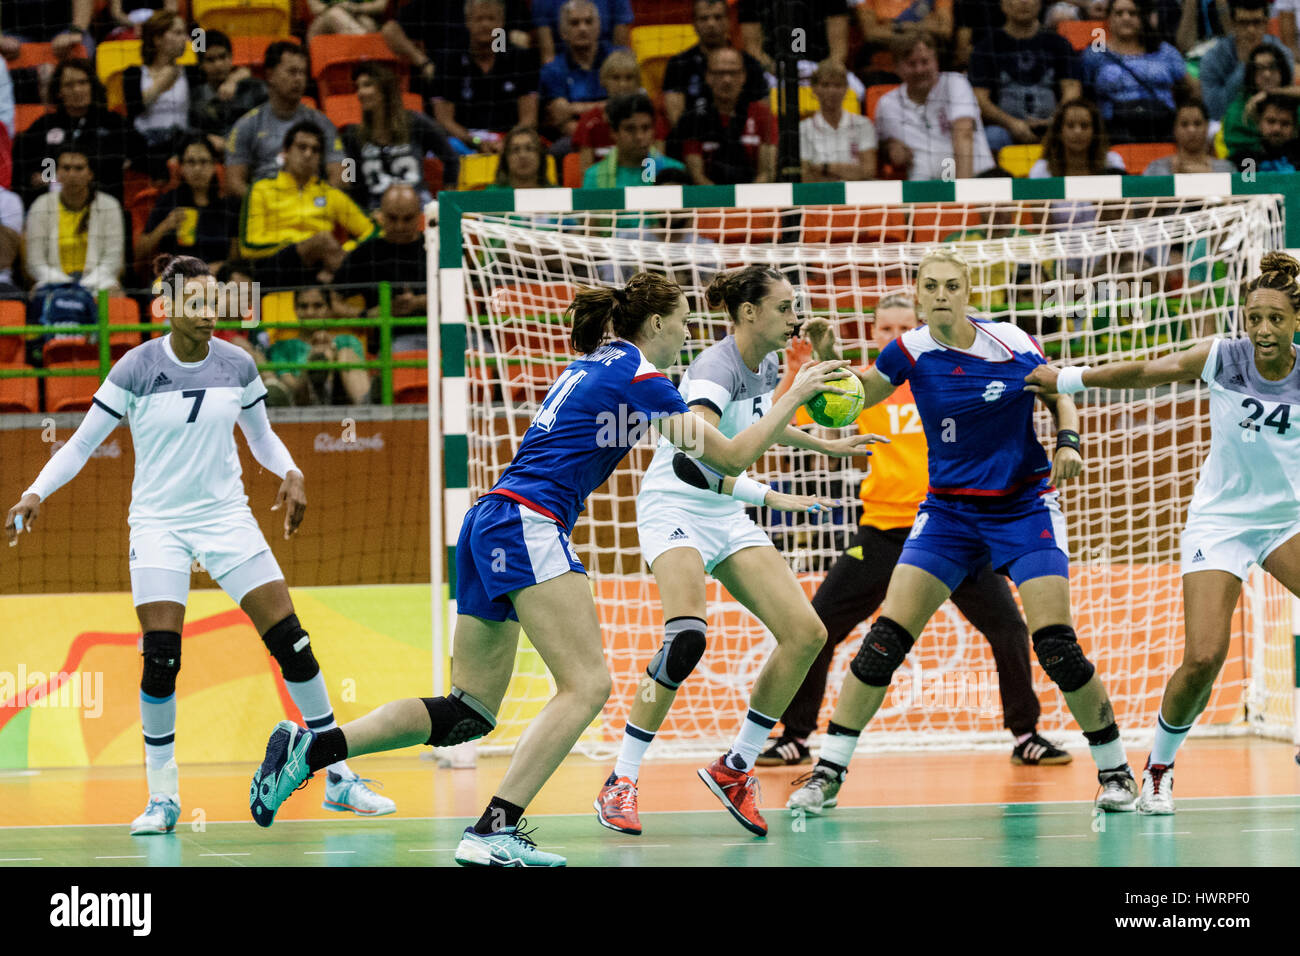 Rio de Janeiro, Brazil. 20 August 2016  Victoria Zhilinskayte (RUS) #21 competes in the women's handball gold medal match Russia vs. France at the 201 Stock Photo